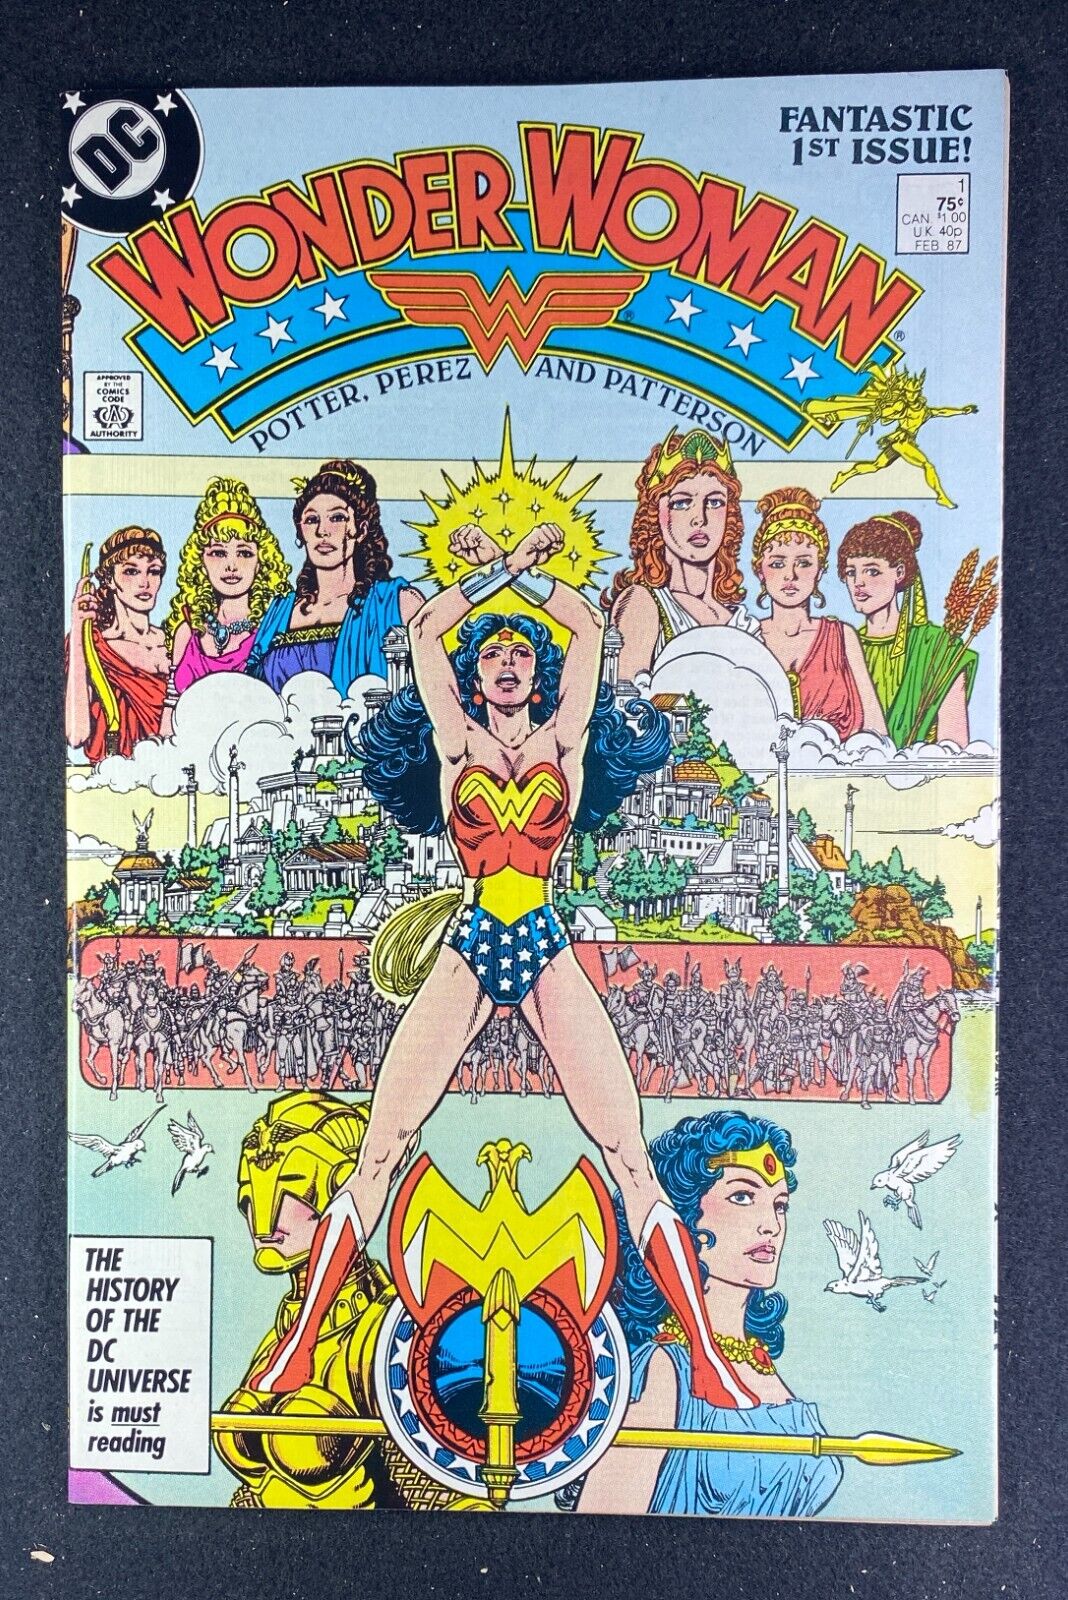 Wonder Woman (1986) #1 NM (9.4) George Perez Cover and Art